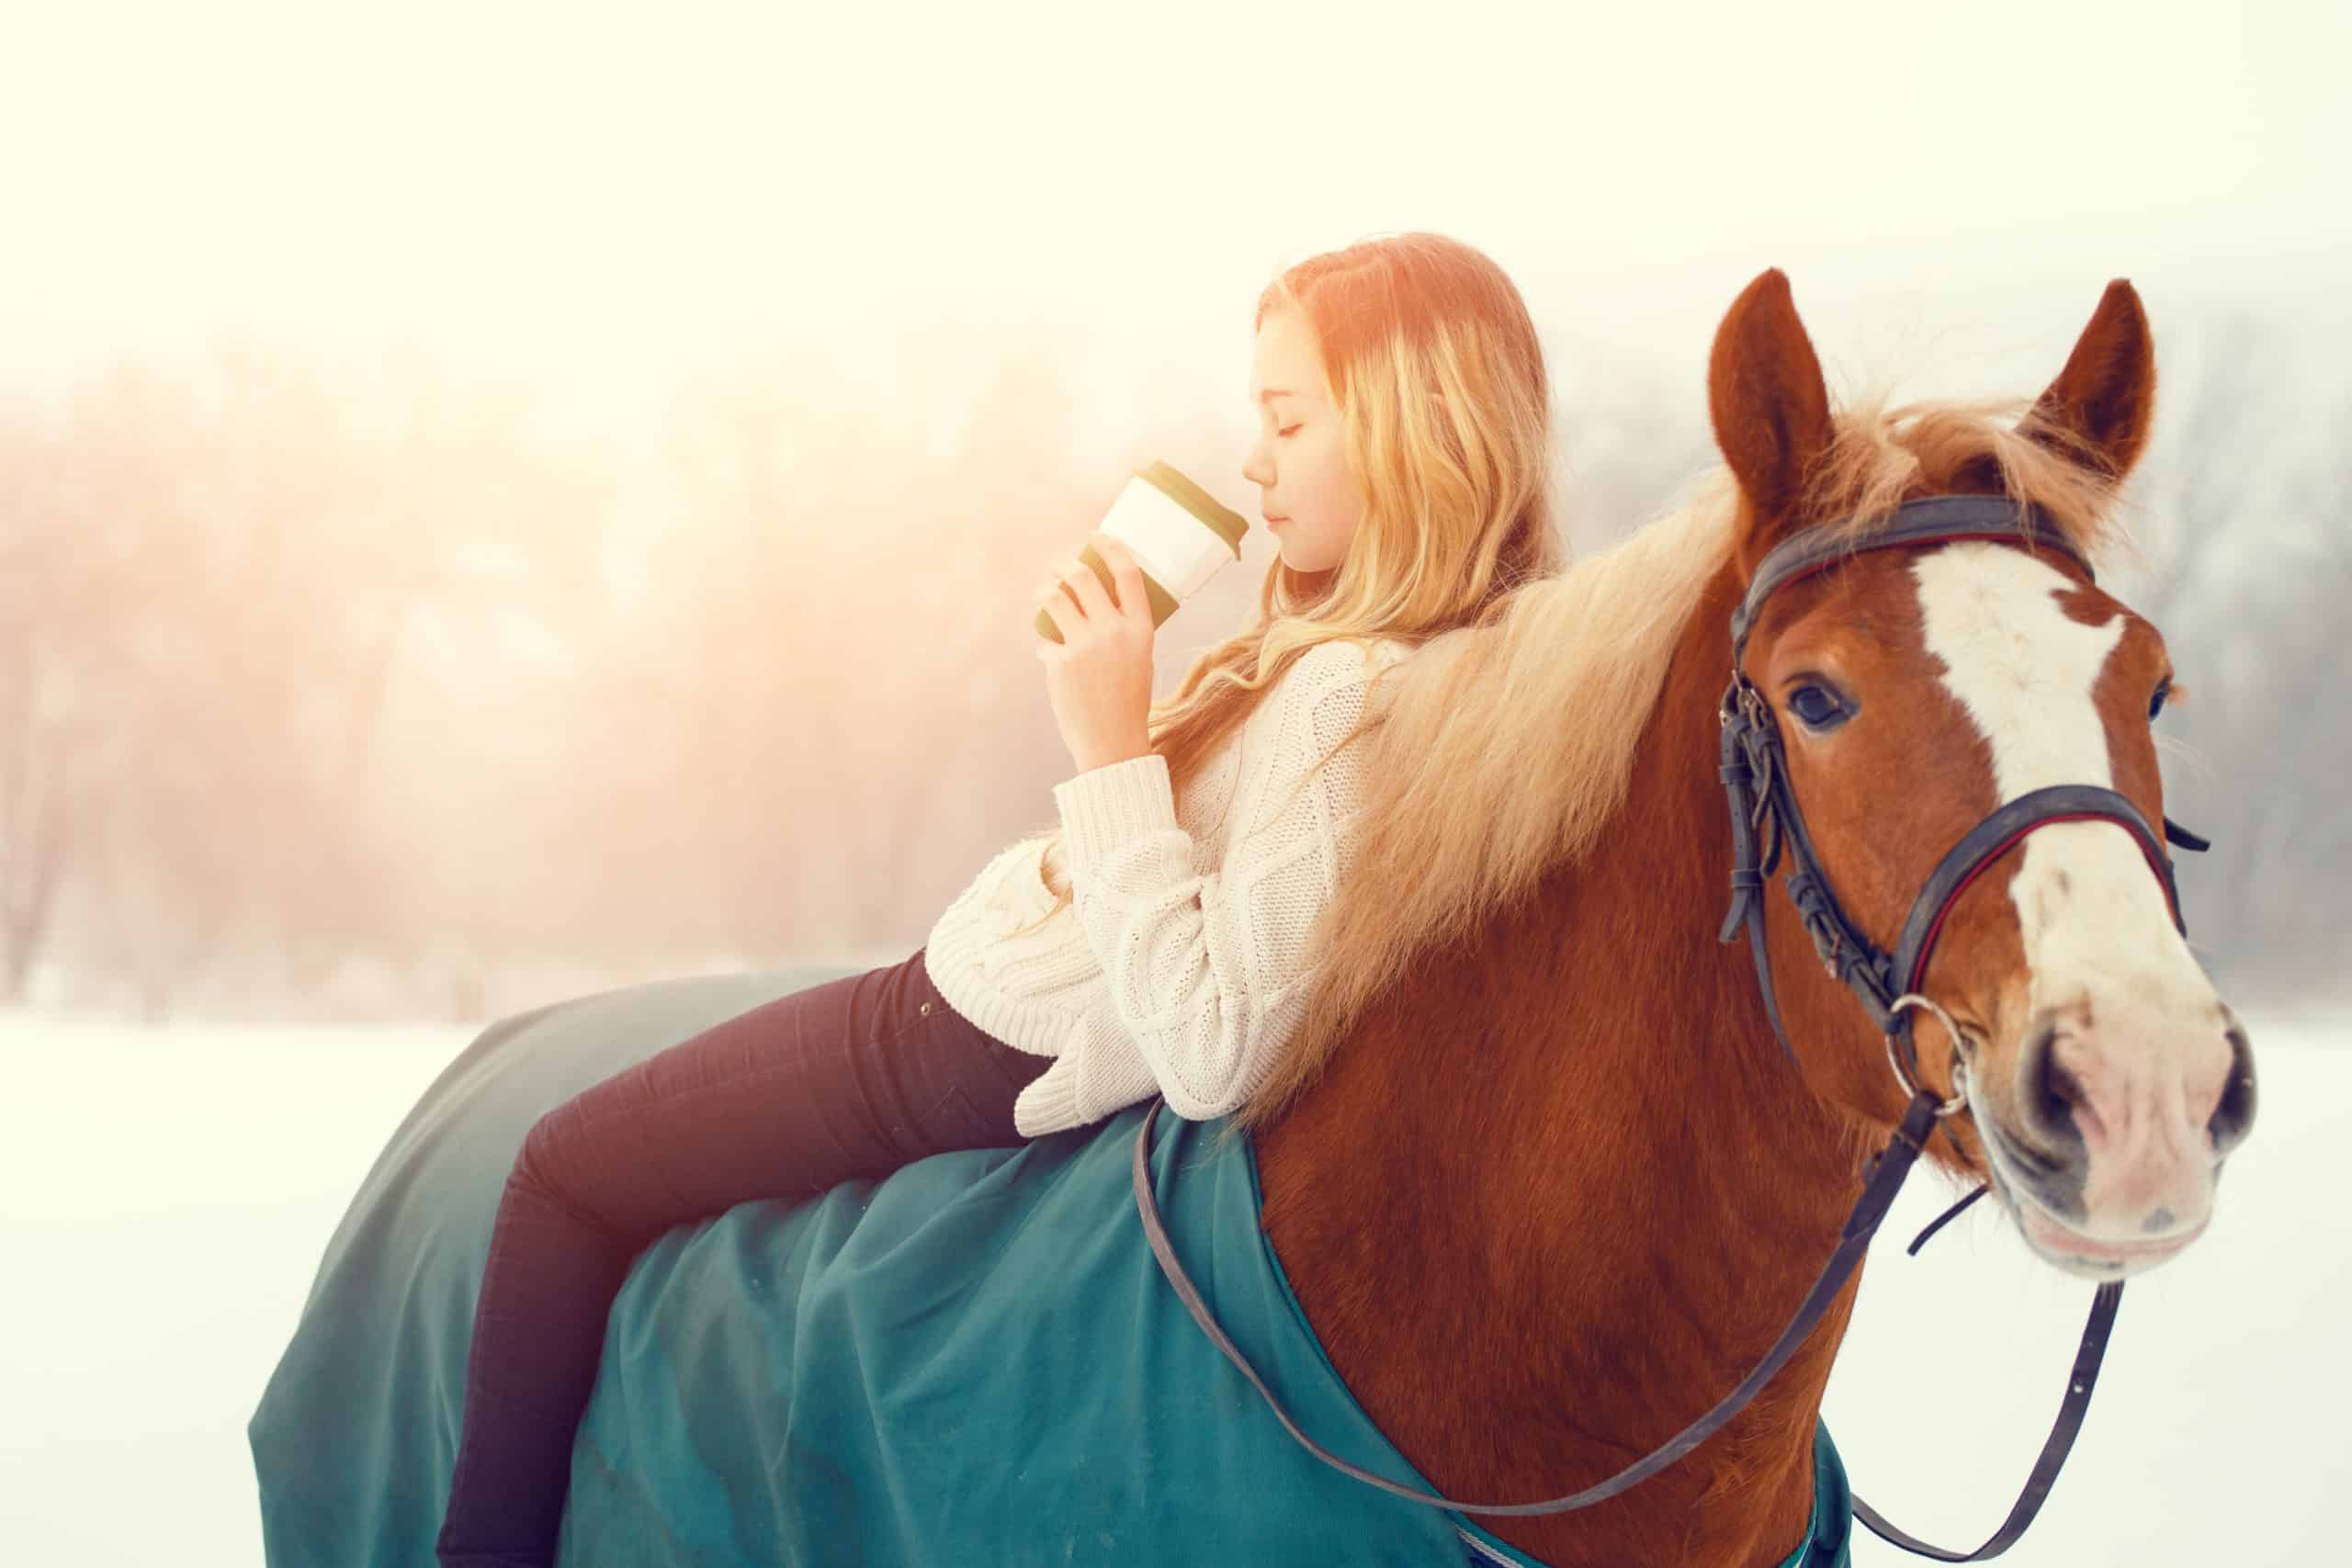 Young rider girl relaxing on horseback with cup of coffee in sunset beams